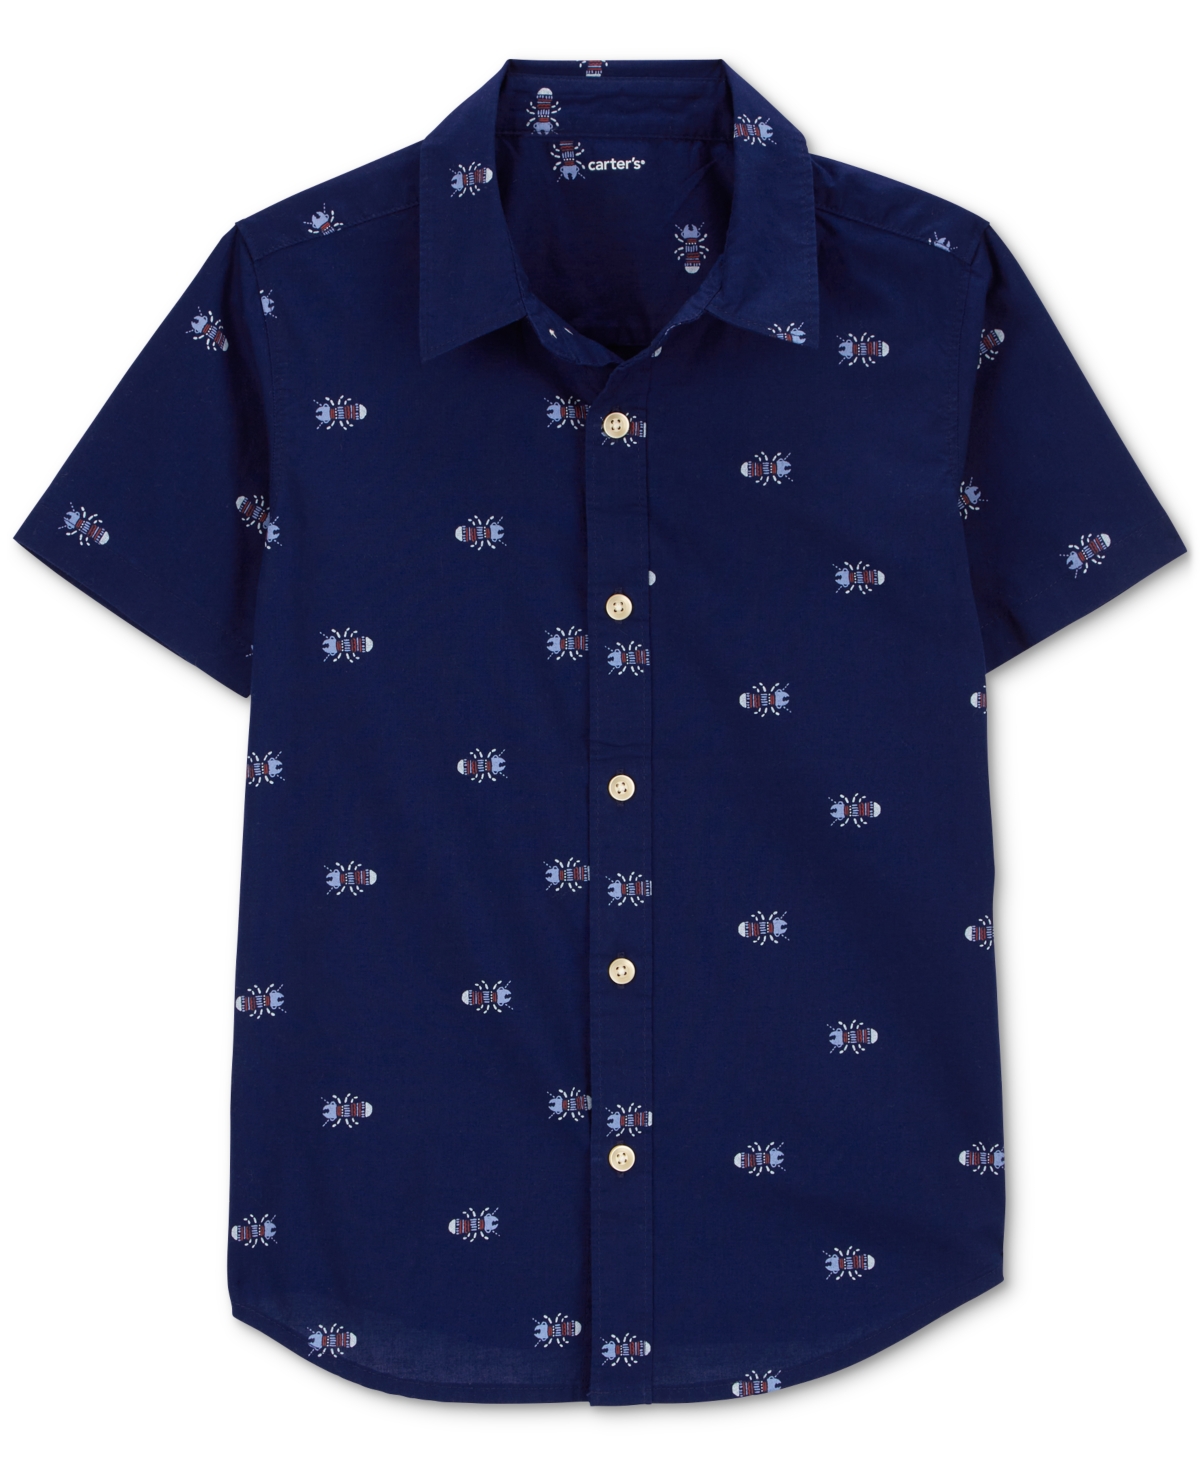 Carter's Kids' Little Boys And Big Boys Button Down Shirt In Navy